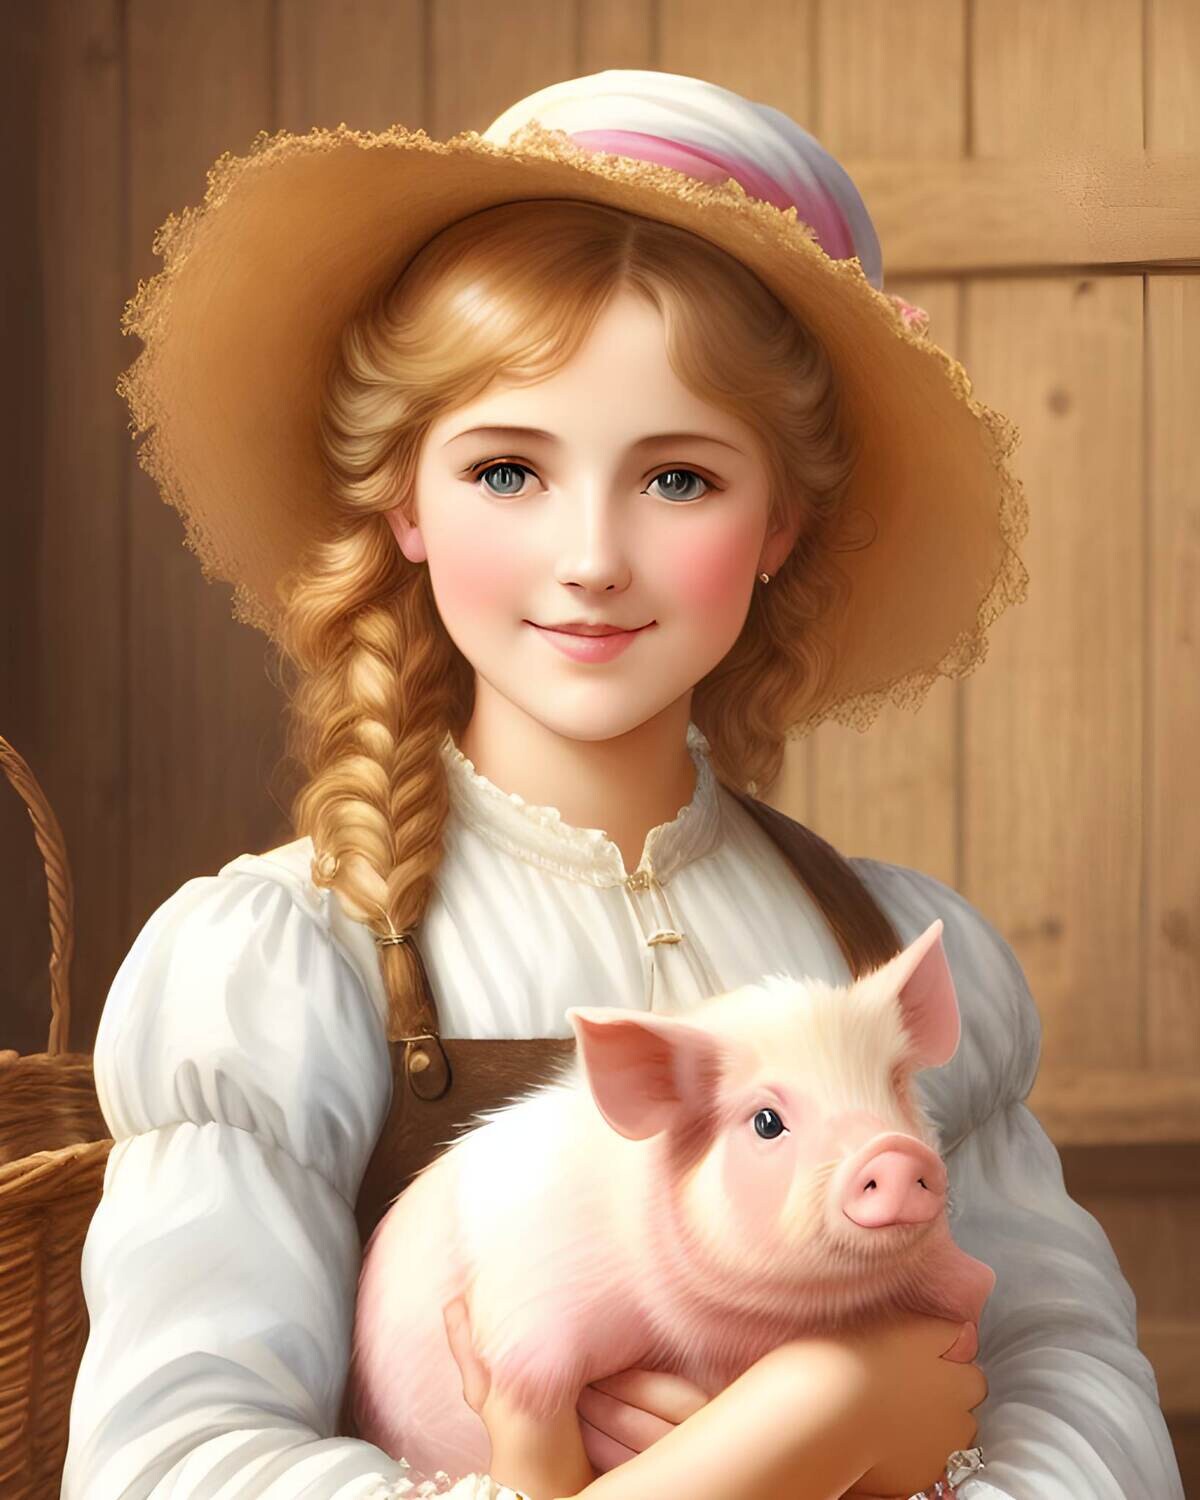 Farm Girl with Pig - 30 x 40cm Full Drill (Square) POURED GLUE - Diamond Painting Kit